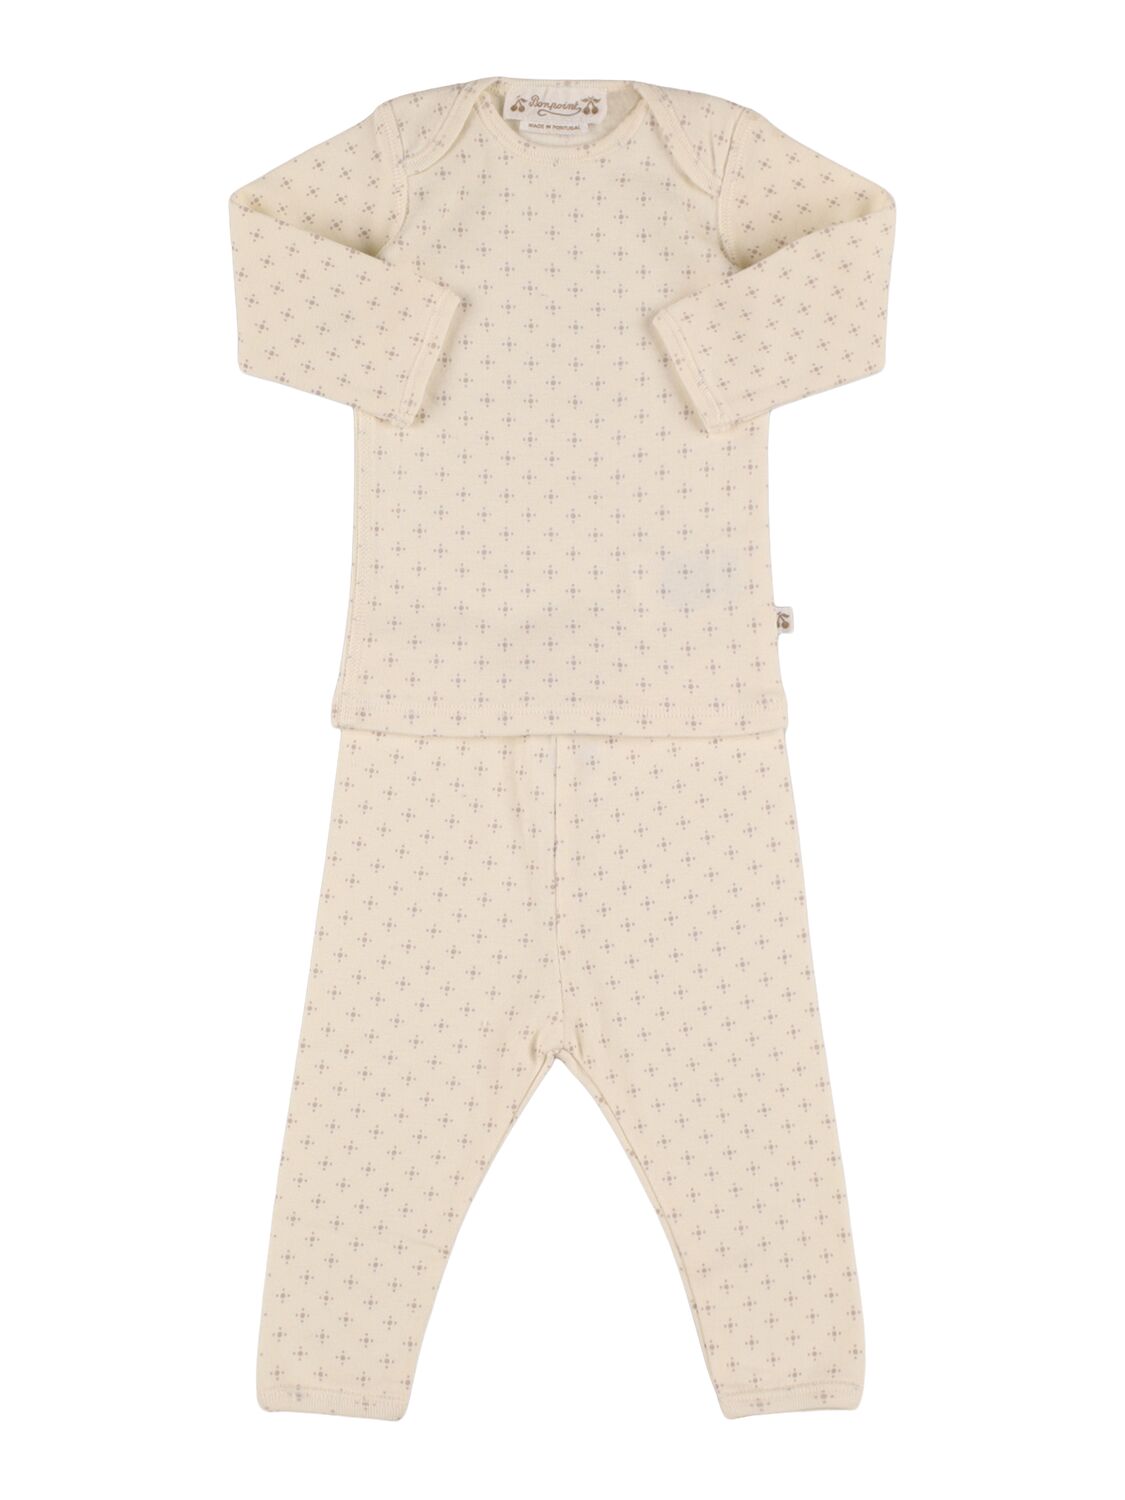 Bonpoint Babies' Printed Cotton T-shirt & Pants In Ivory